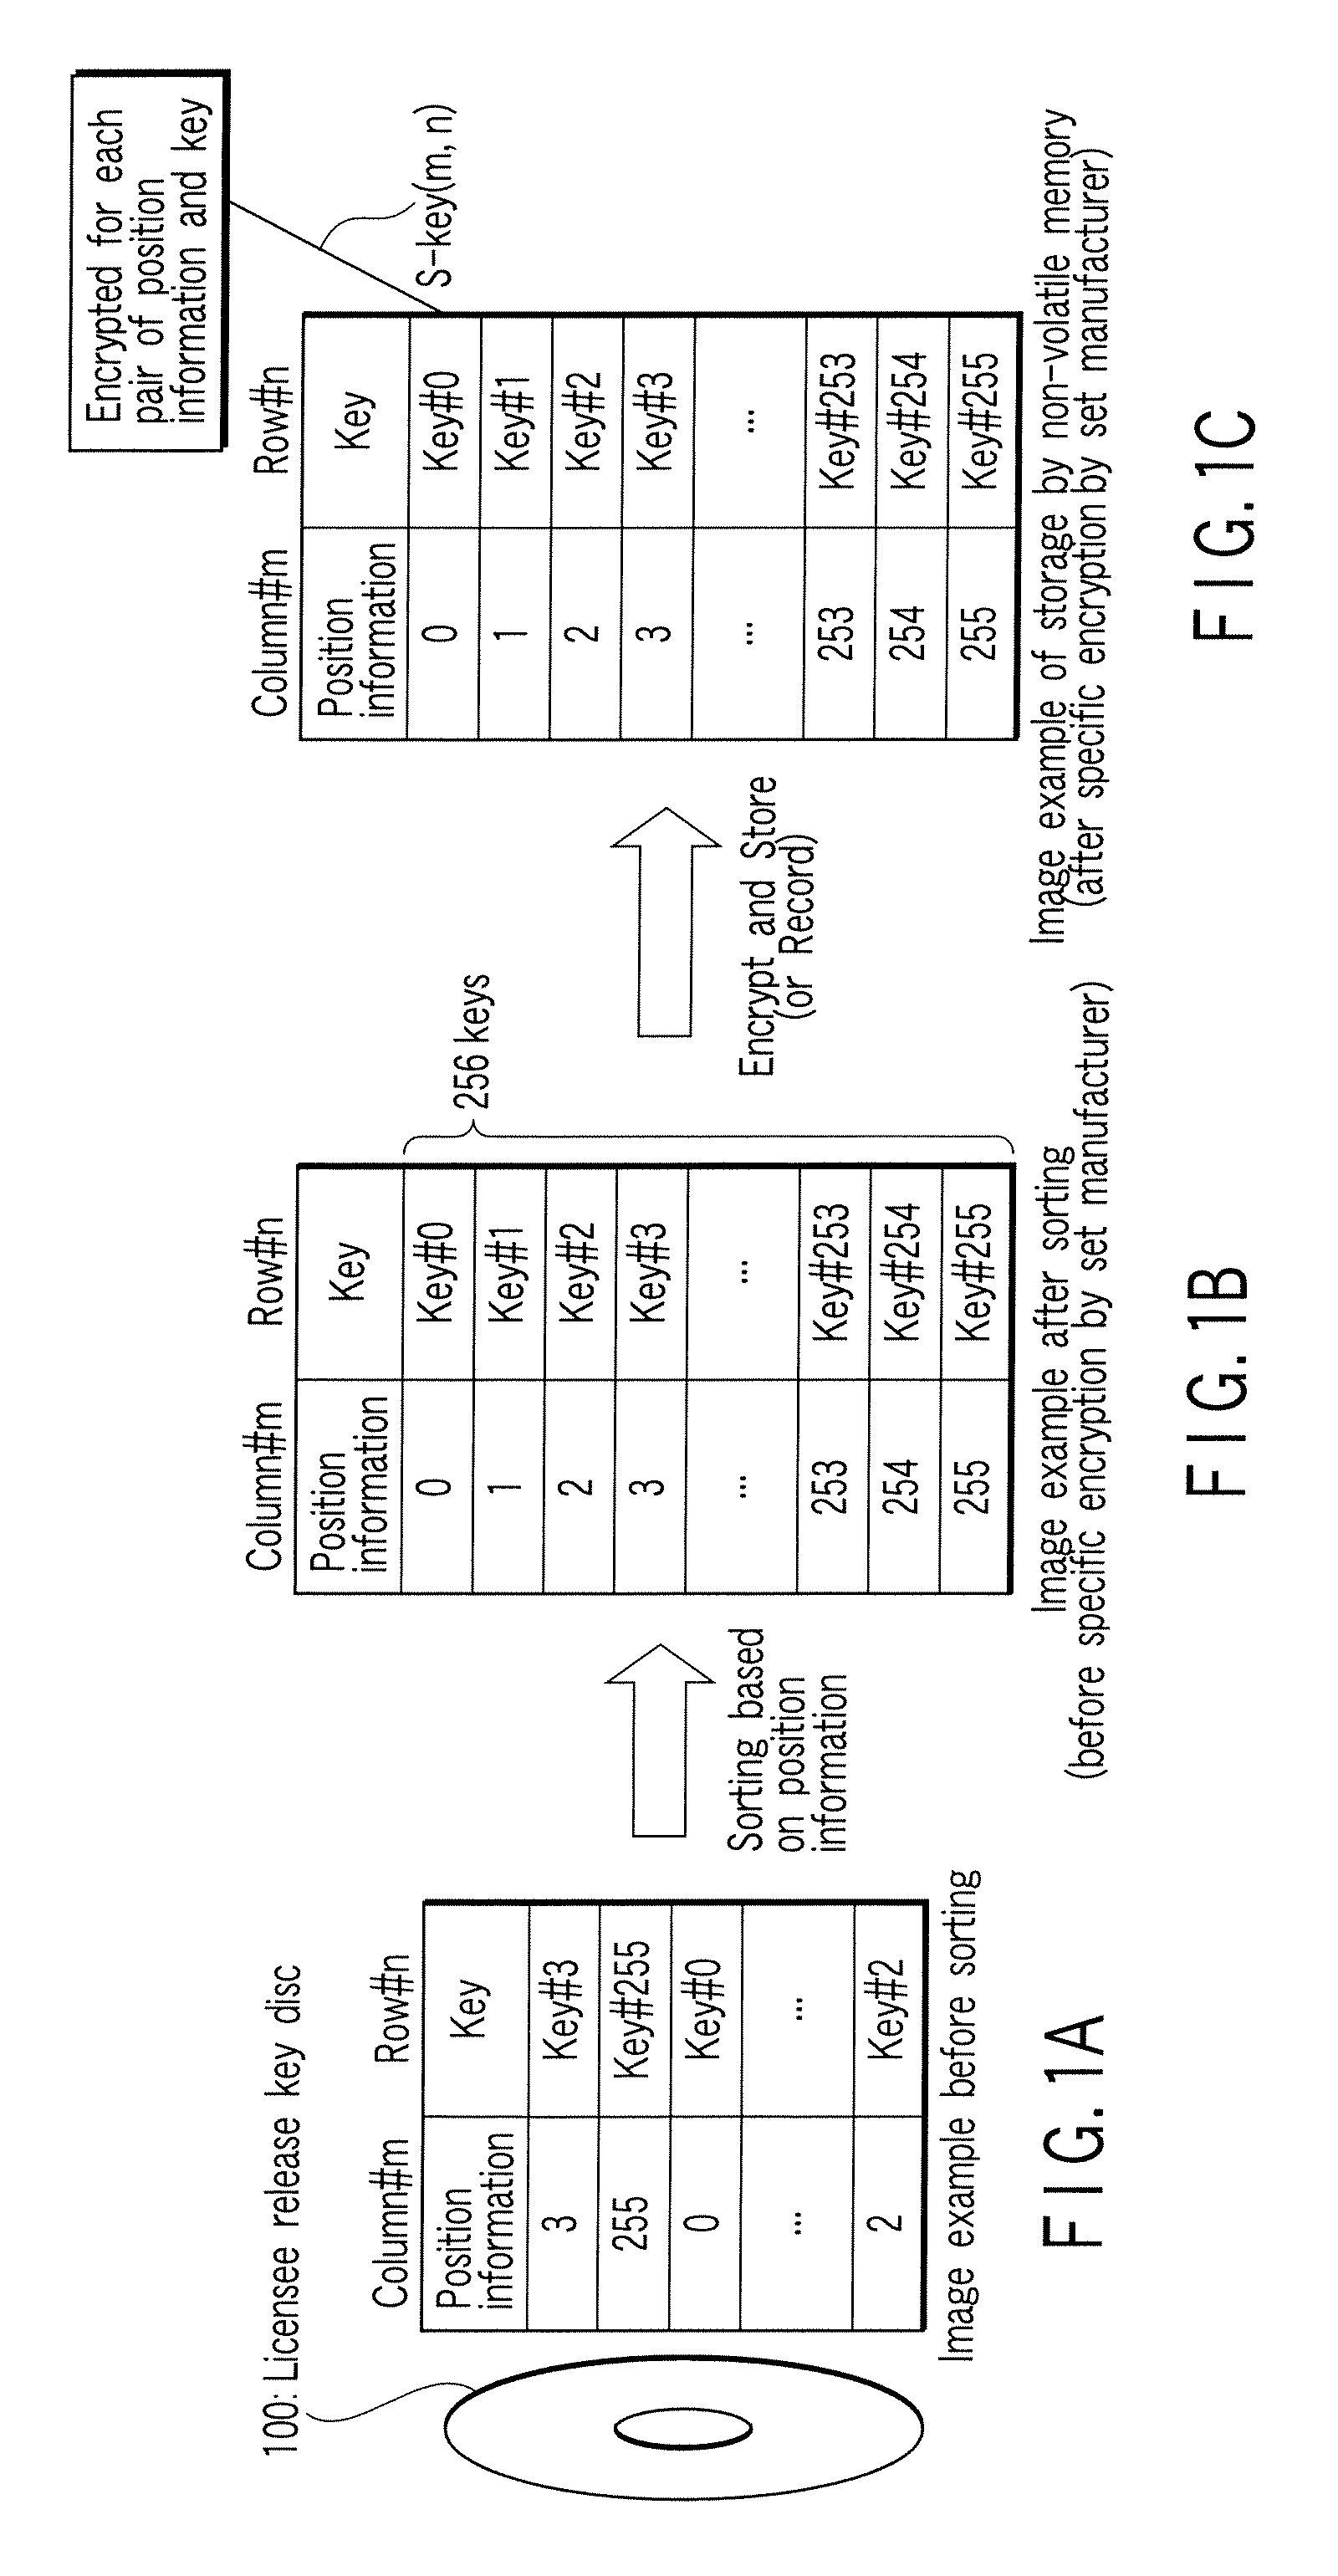 Method of storing or recording highly confidential data, playback apparatus using highly confidential data, and memory storing highly confidential data